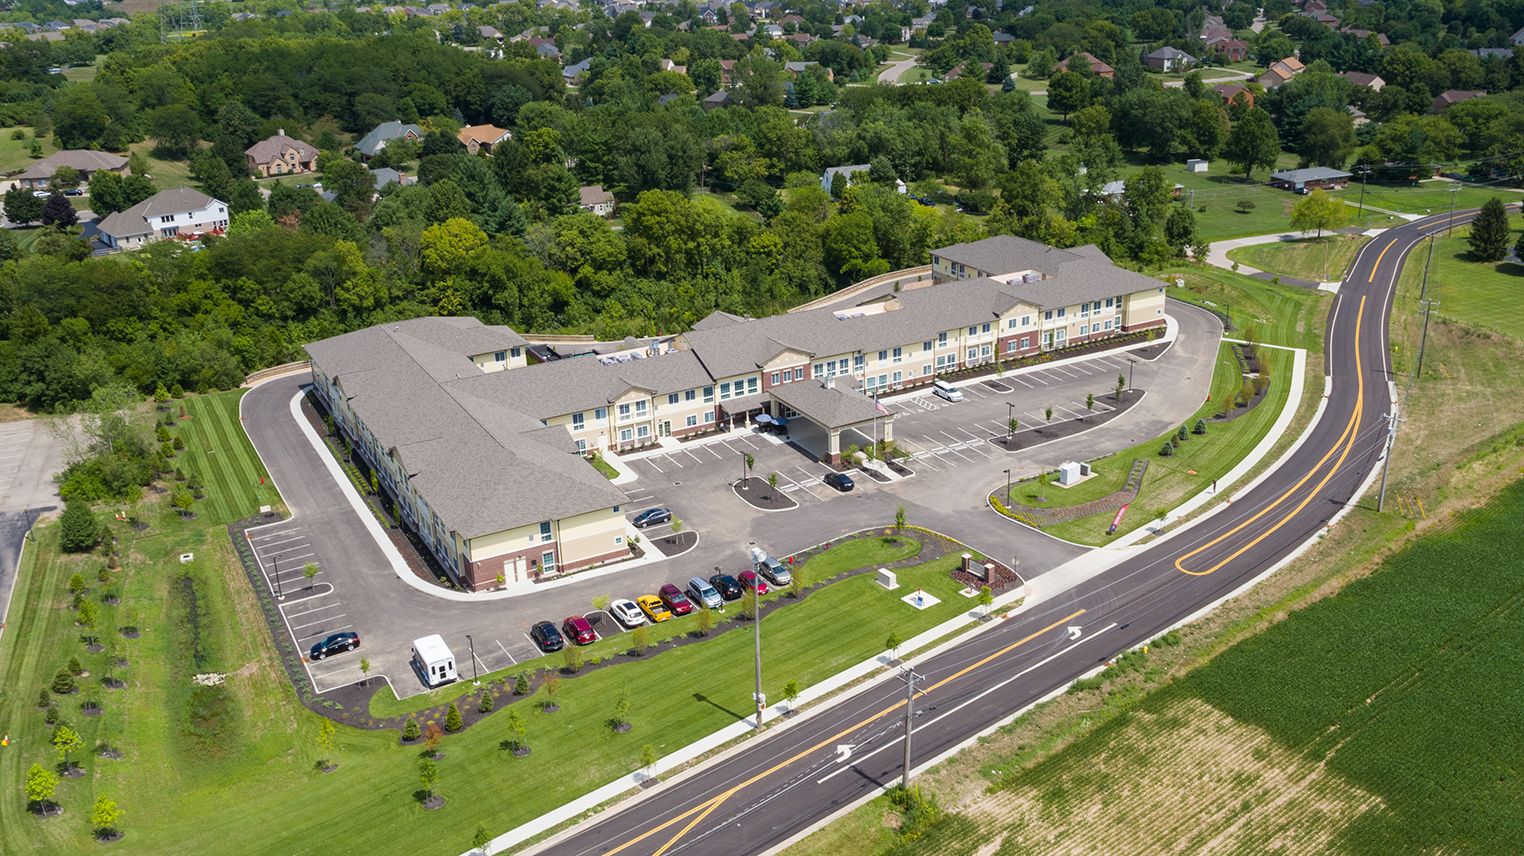 Aerial view of Mason Assisted Living & Memory Care community with buildings, roads, and cars.